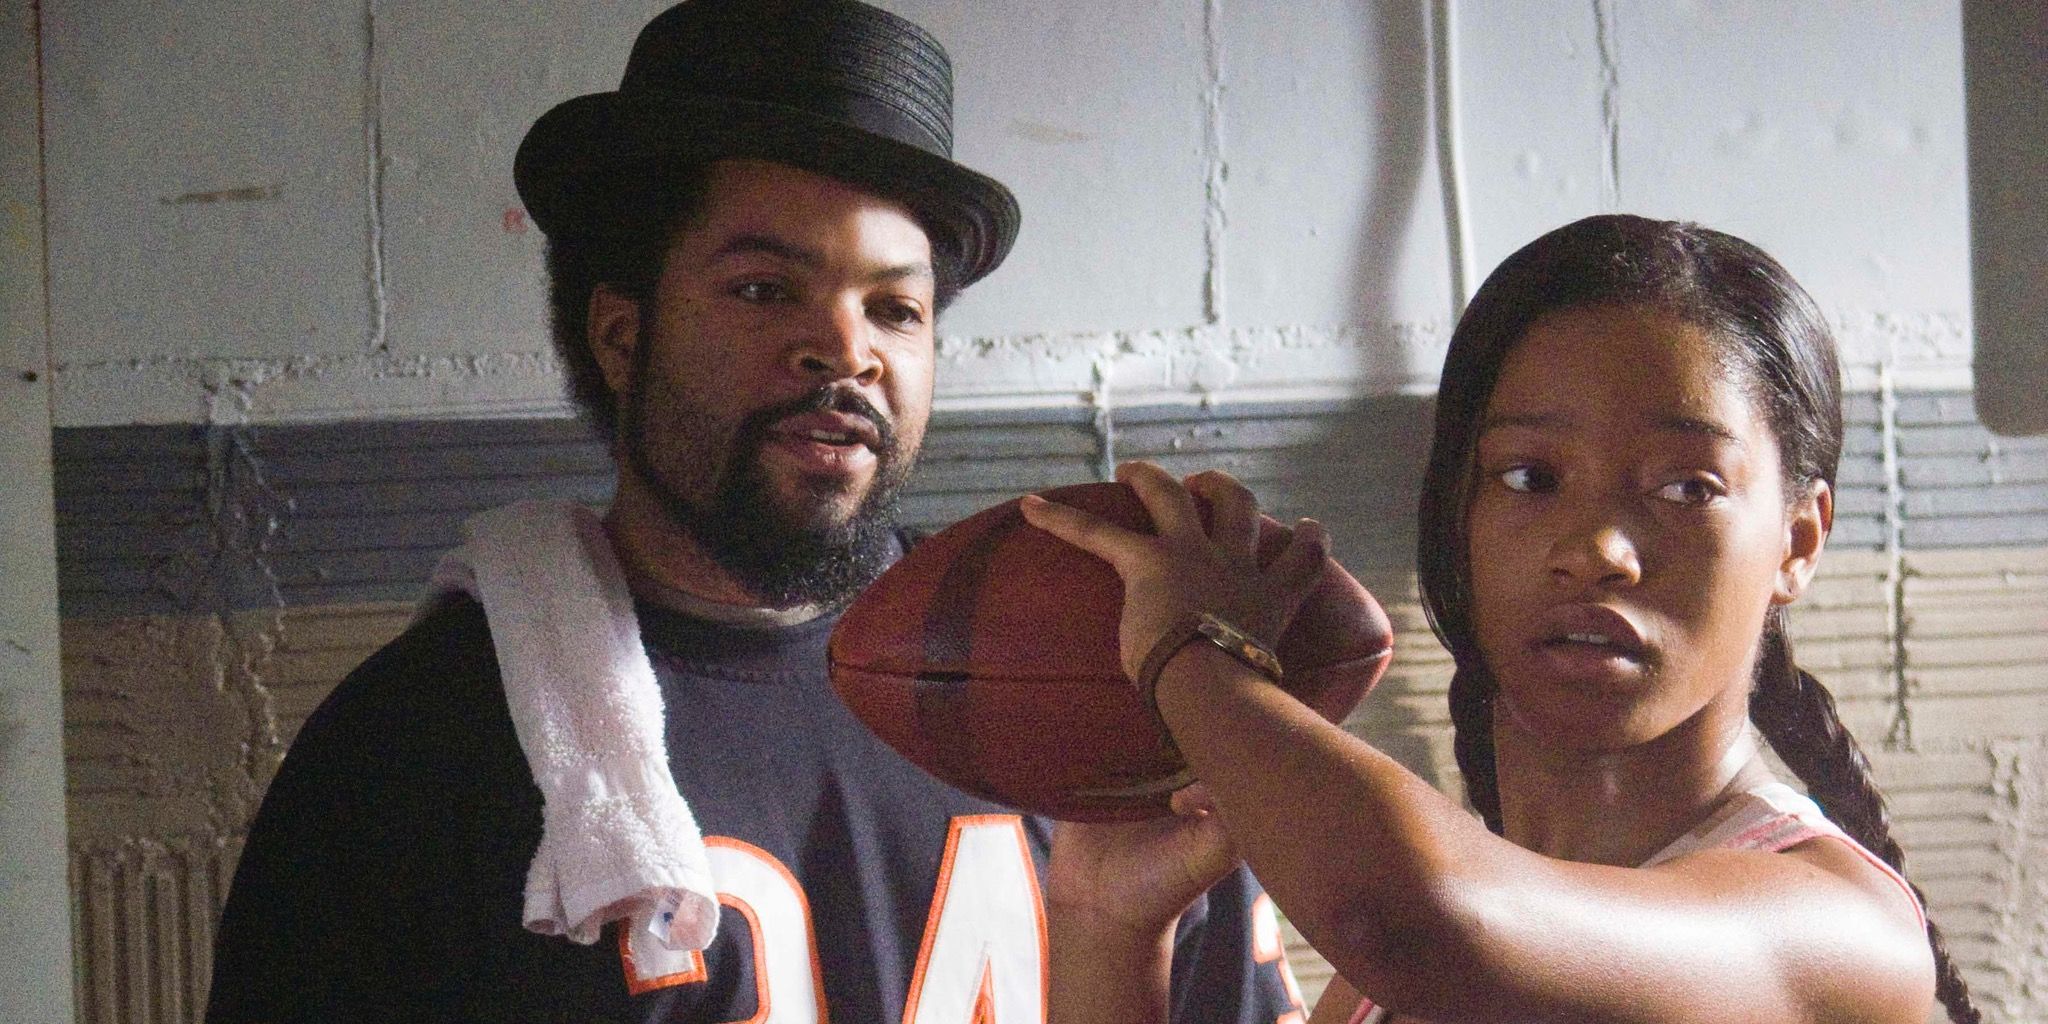 Keke Palmer throw a football next to Ice Cube in The Longshots movie